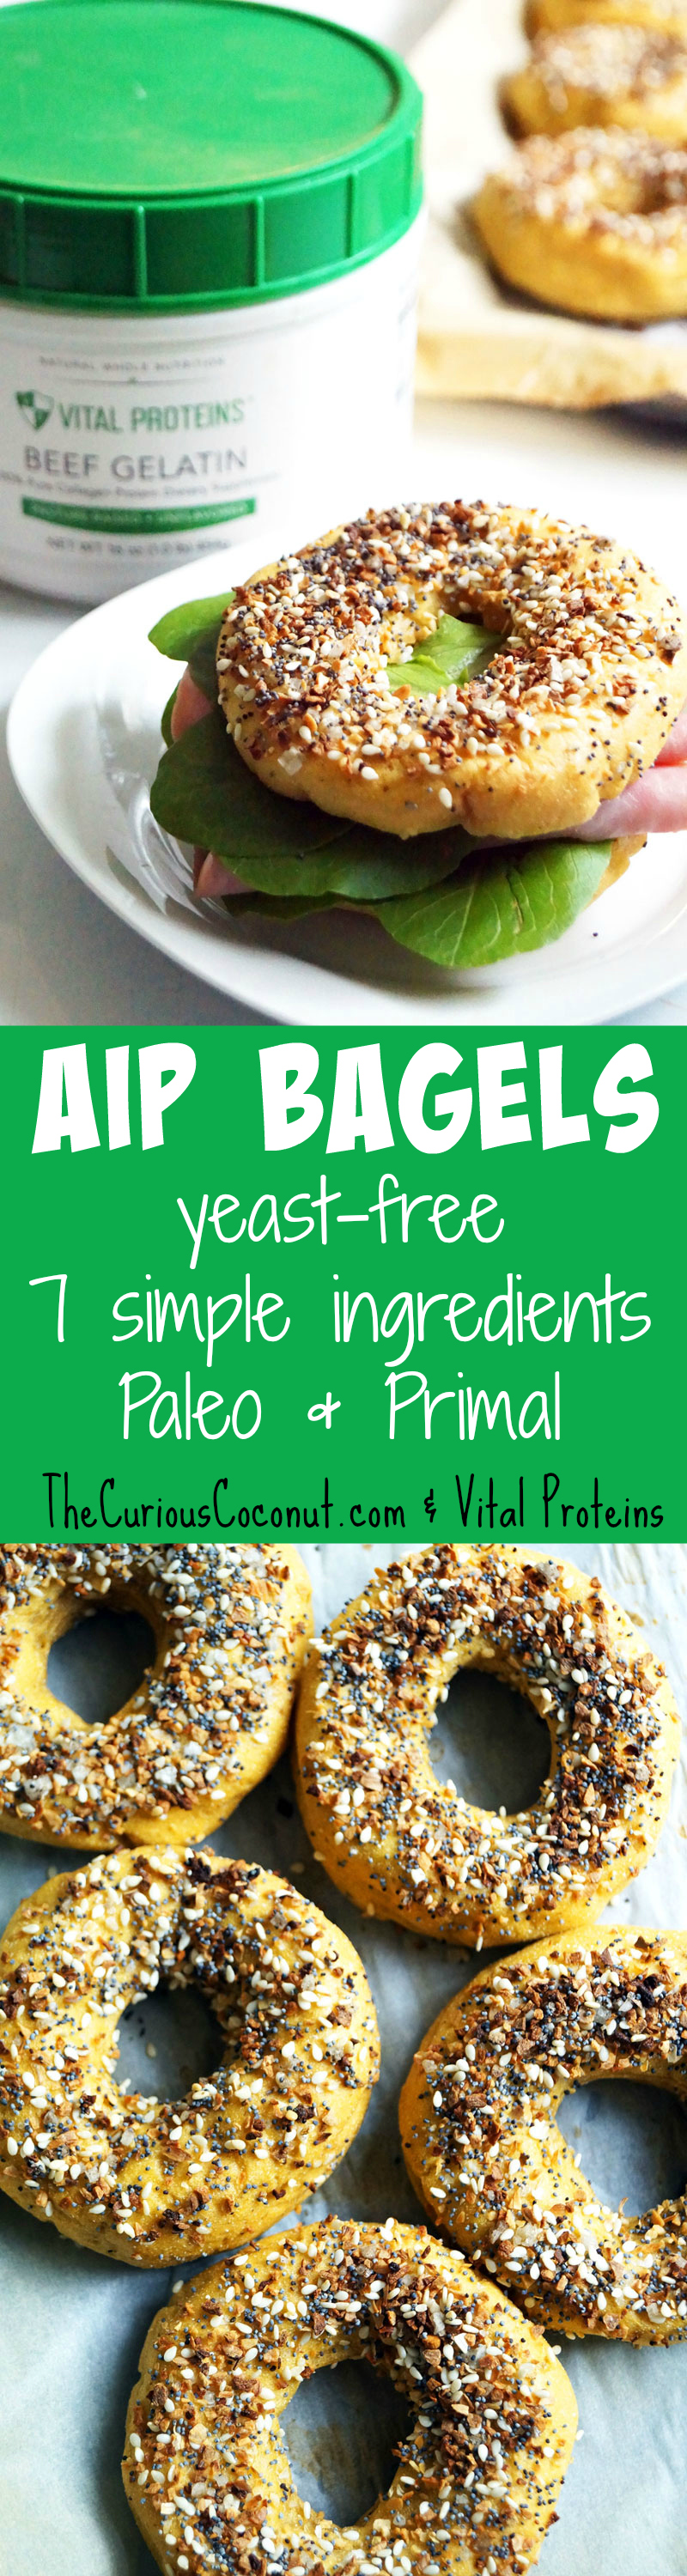 #AIP Bagel with Vital Proteins Gelatin - with 7 simple ingredients these are a breeze to make and a real treat on the autoimmune paleo protocol! // TheCuriousCoconut.com